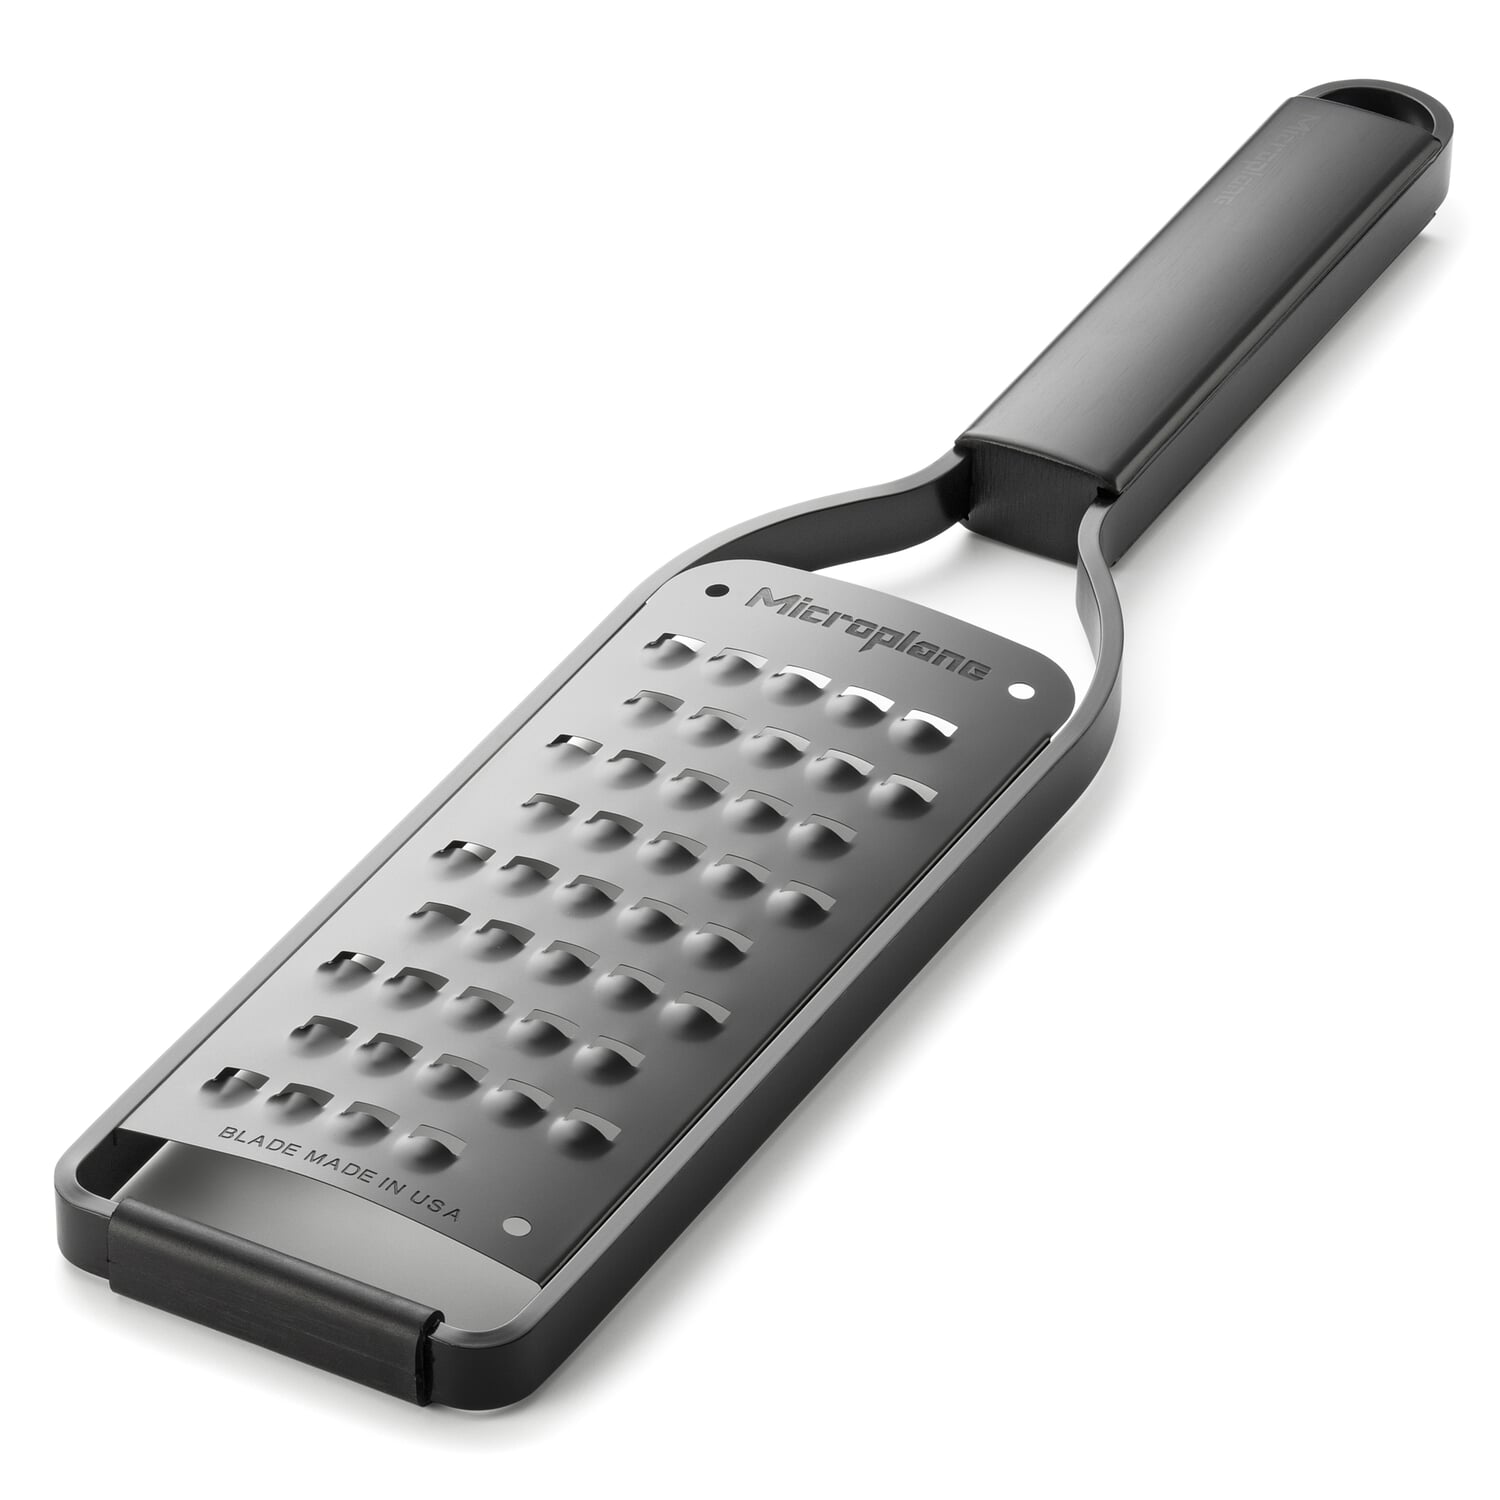 Microplane Grater Master - Extra Coarse - Stainless Steel/Wood